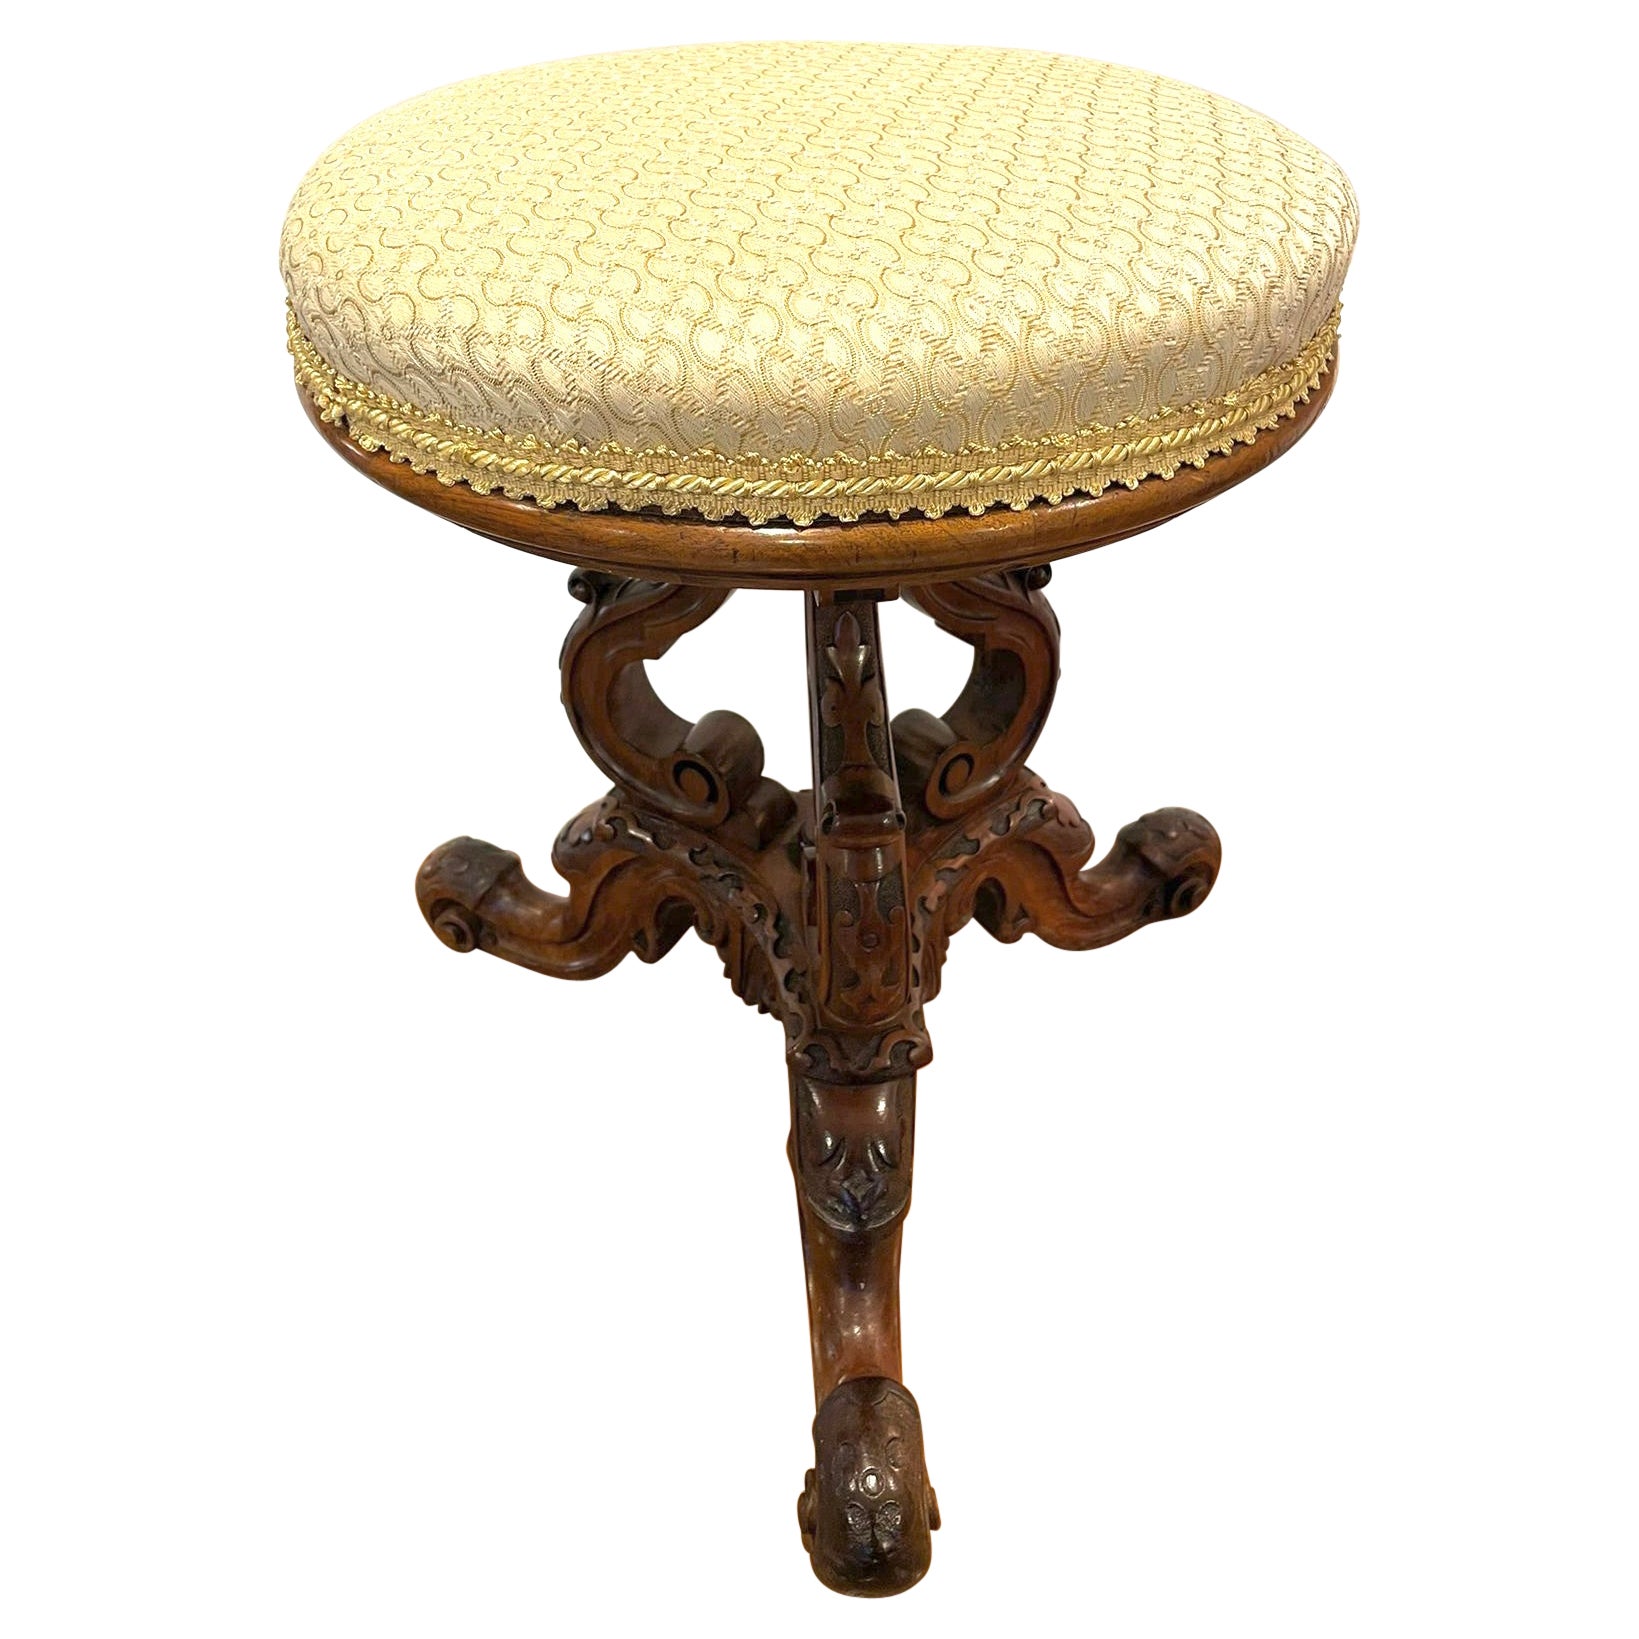 Outstanding Quality Antique Victorian Carved Walnut Stool For Sale